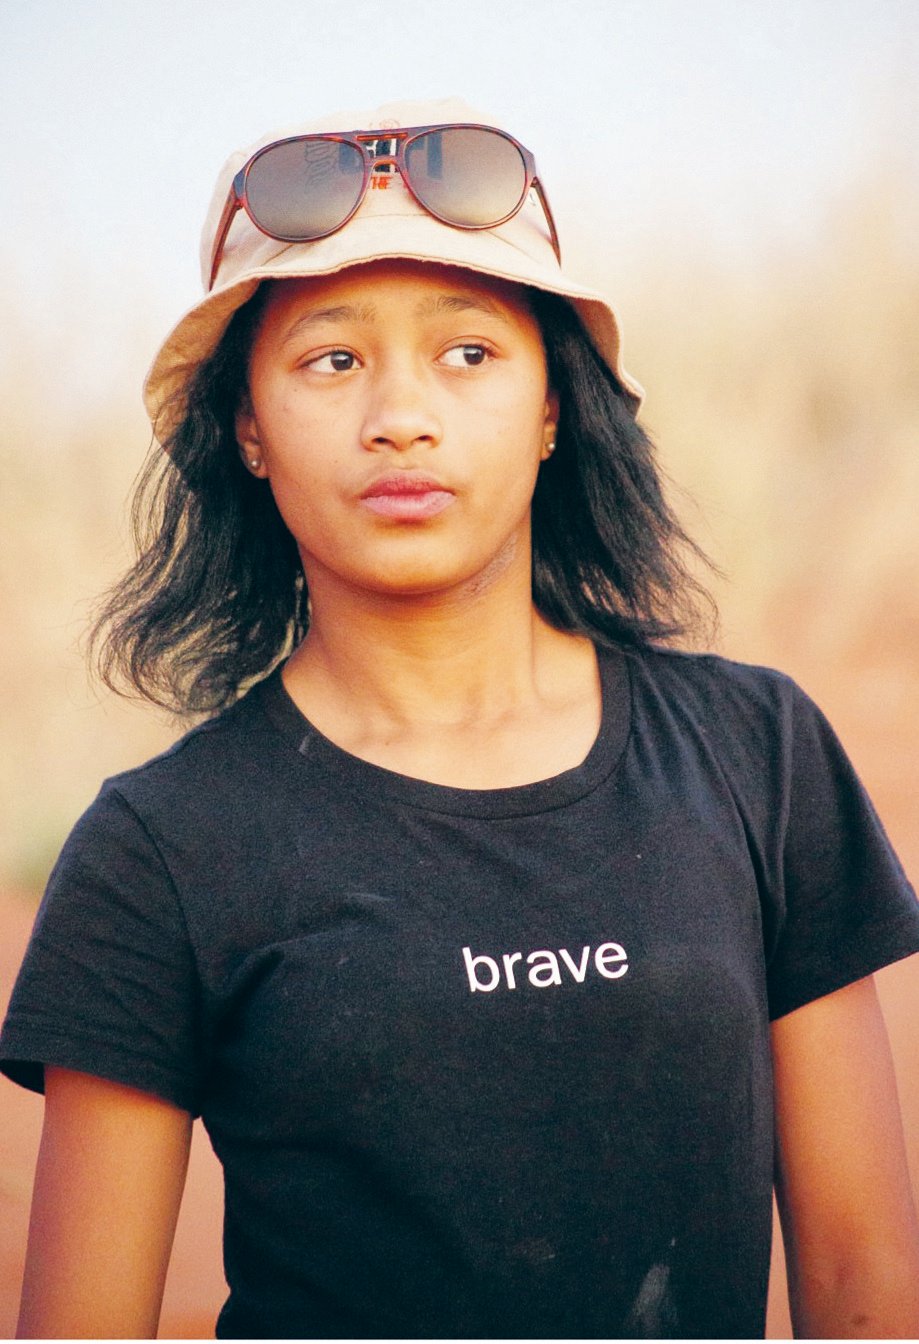 Since 2010, Brave has provided safe spaces for more than 400 girls and young women. 